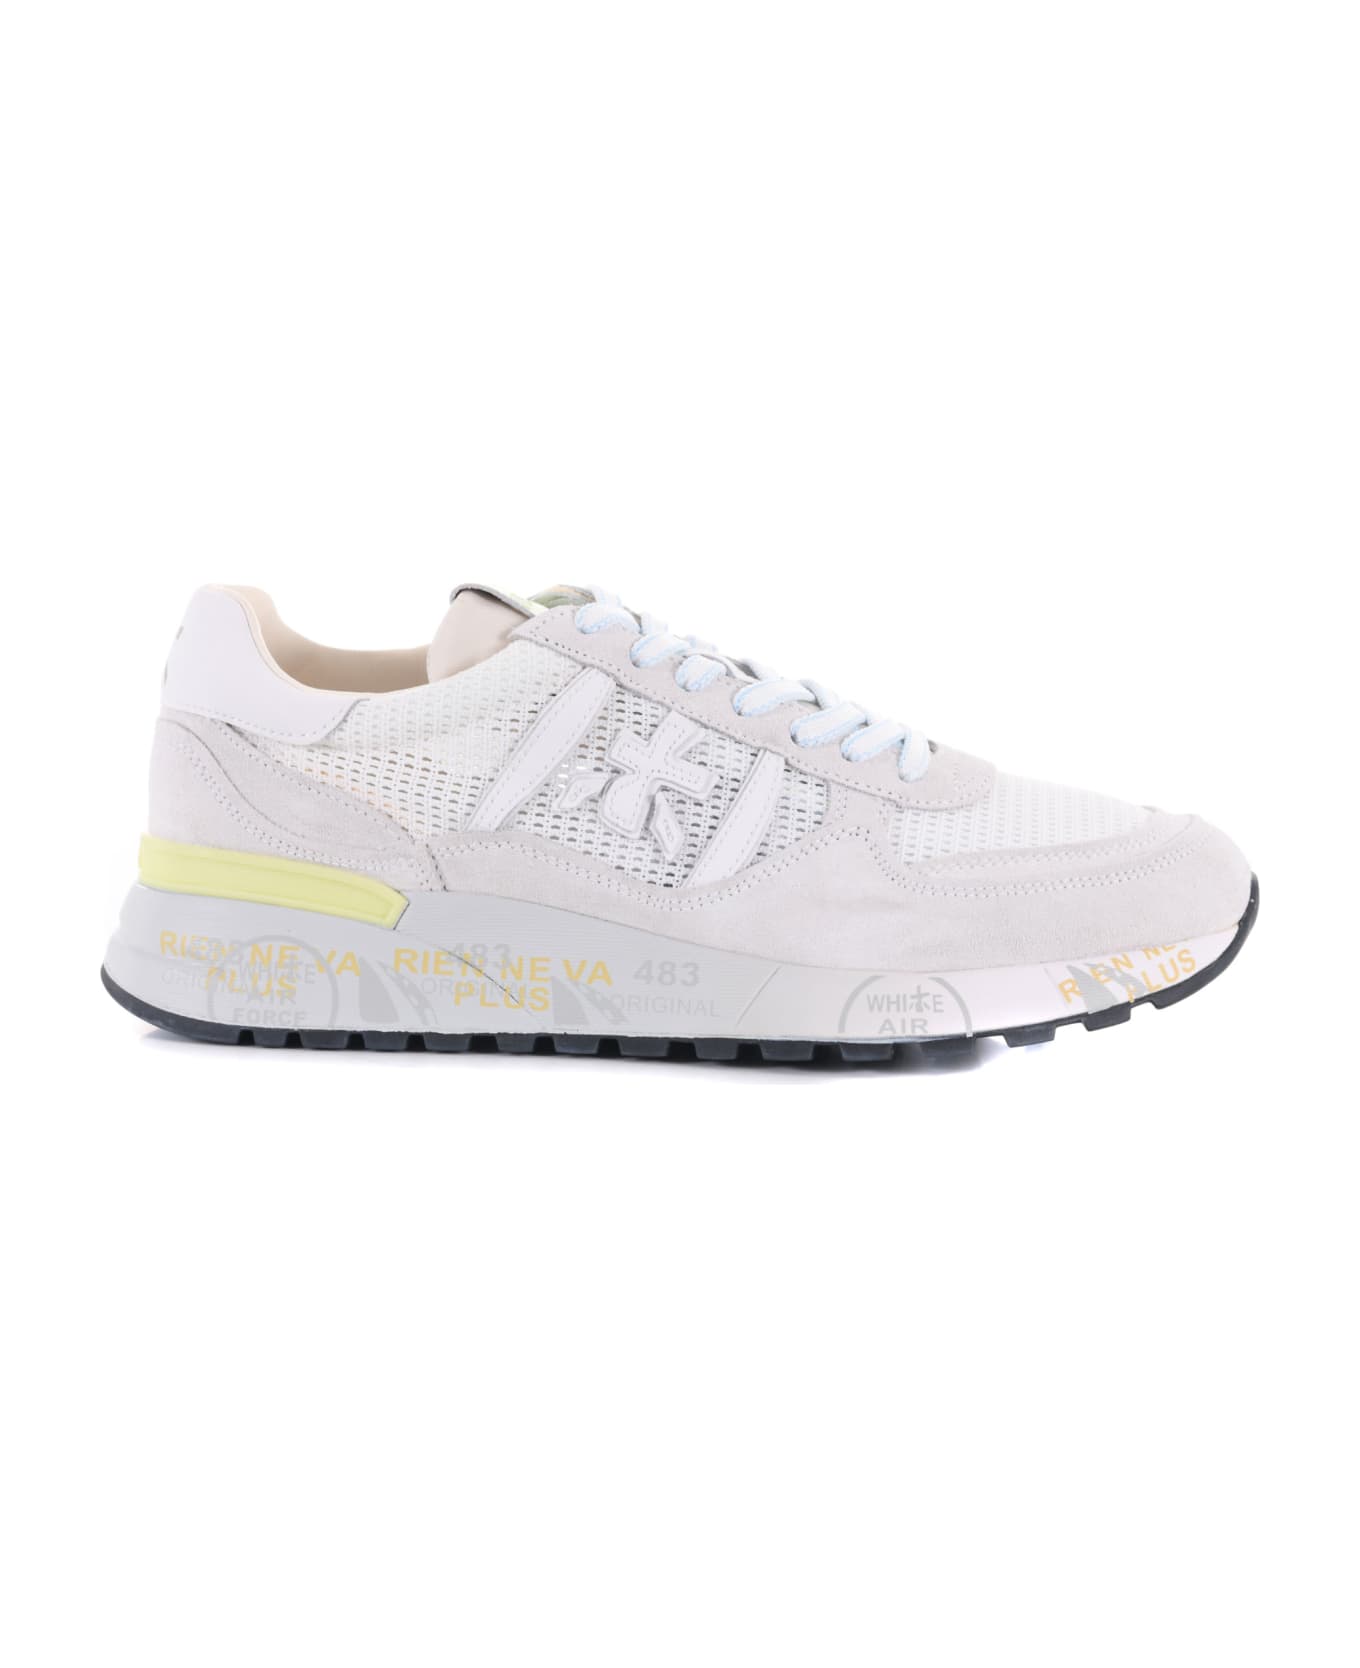 Premiata Sneakers In Suede And Perforated Mesh Scafati Store Available - Ghiaccio/bianco